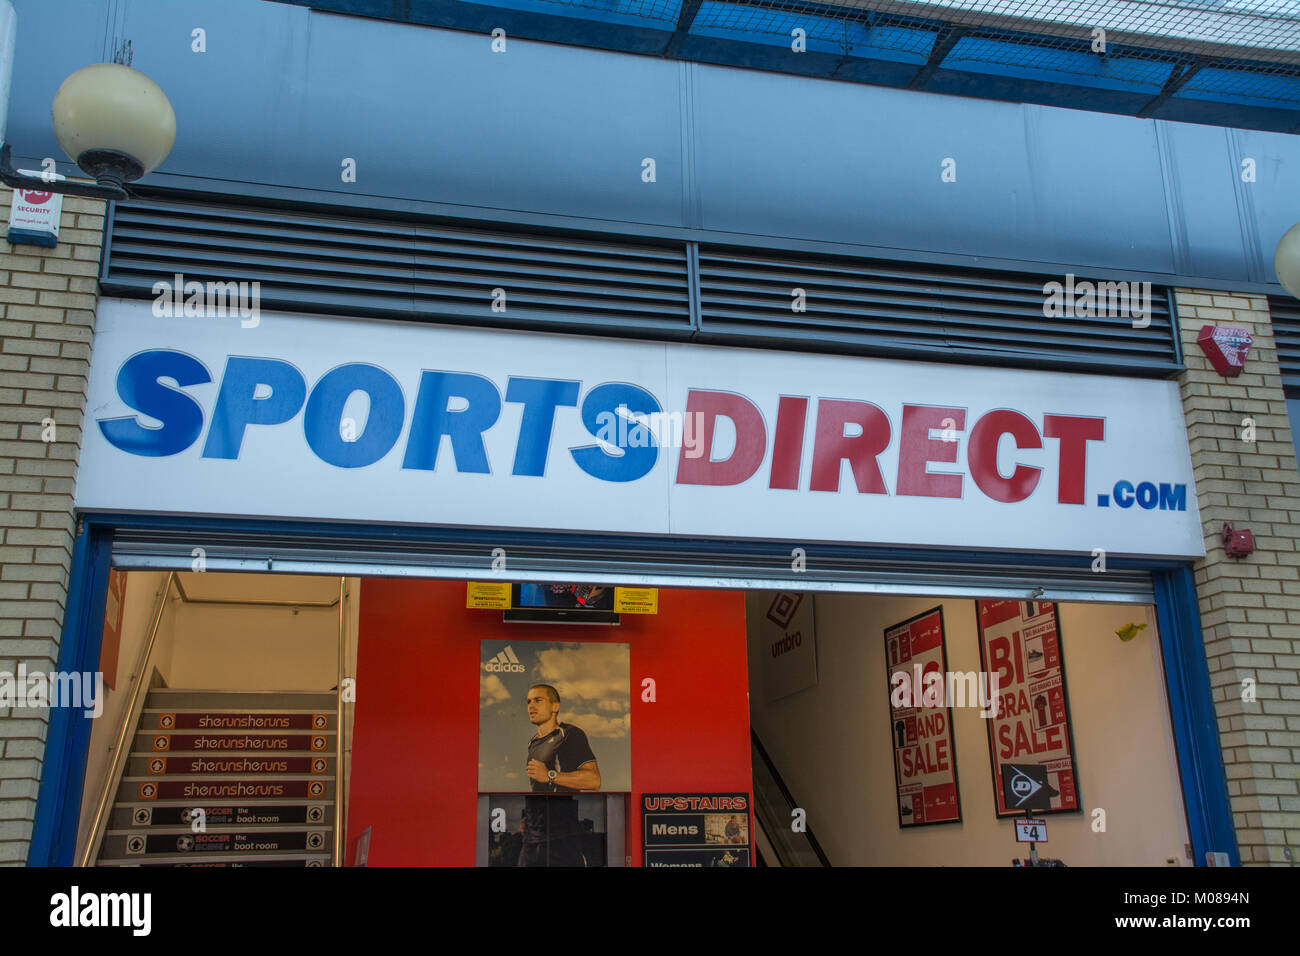 Sports direct shop front and sign or logo, UK Stock Photo